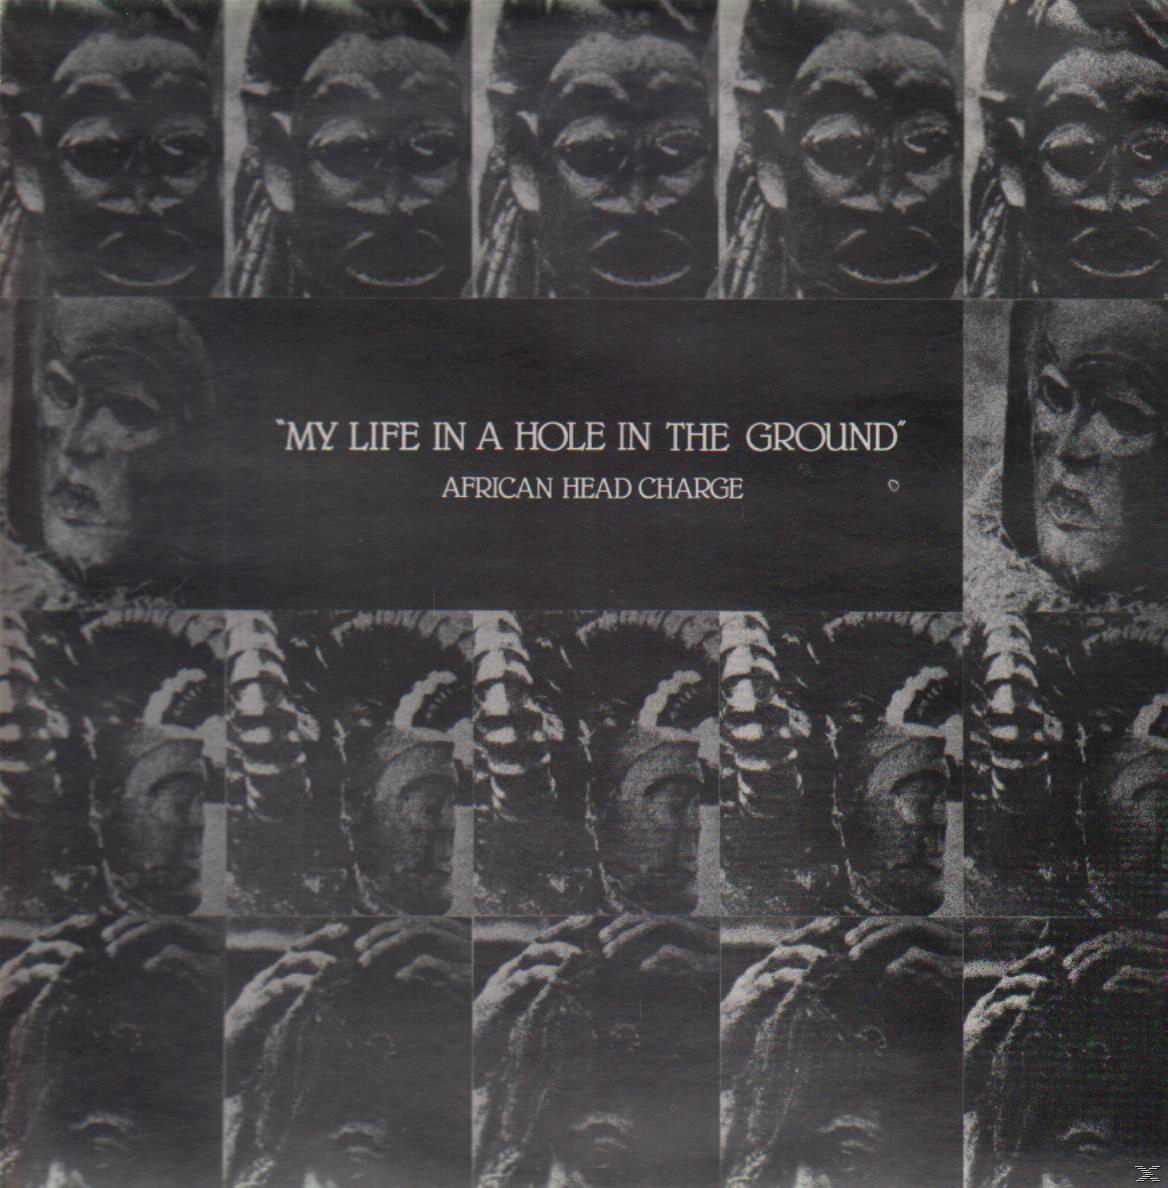 African Head Charge Download) In A (LP - The Life - My + In Hole Ground